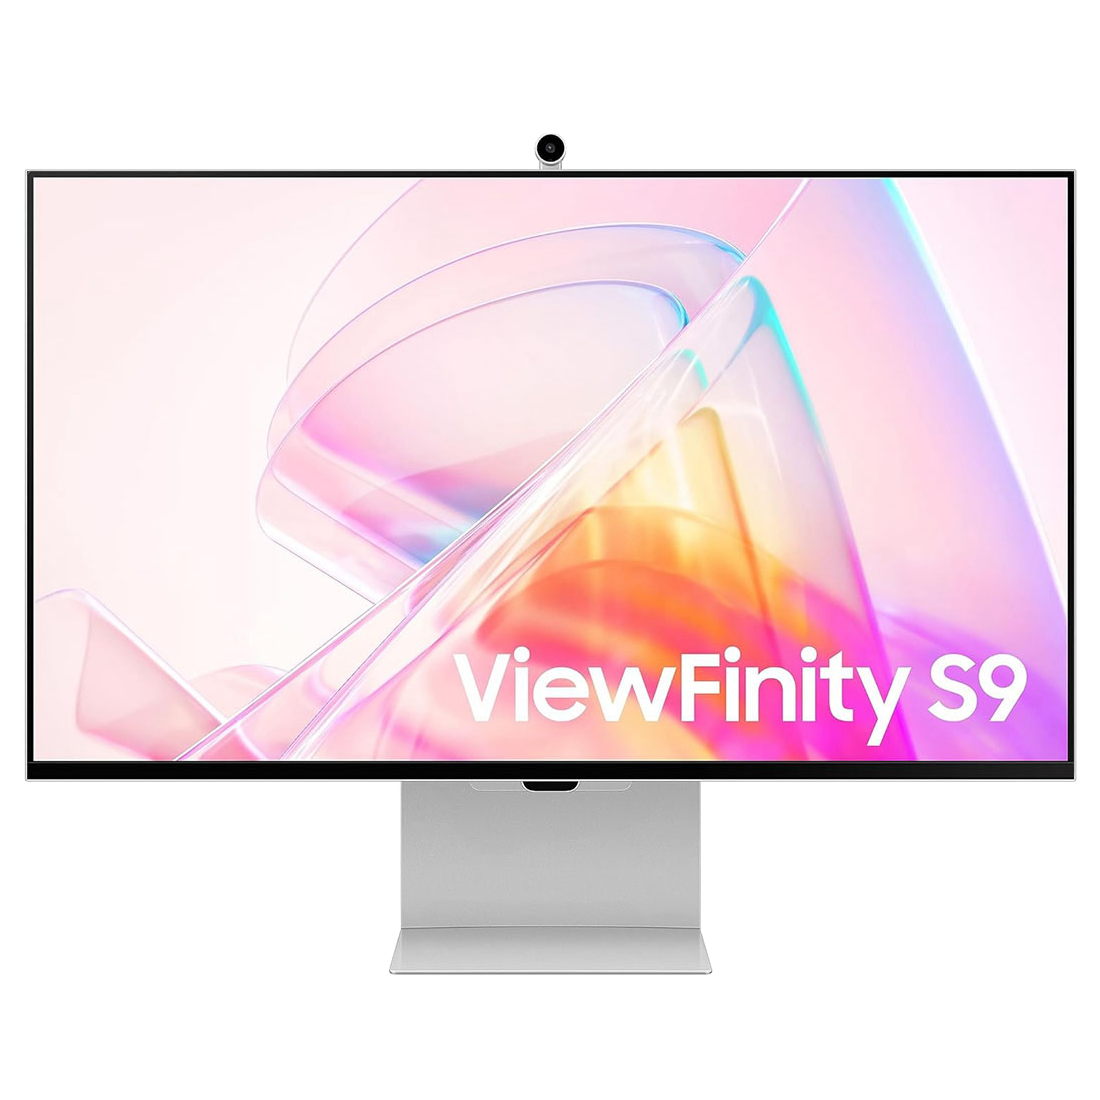 <p><strong>Samsung ViewFinity S9</strong> 27" 5K Monitor&nbsp;</p>